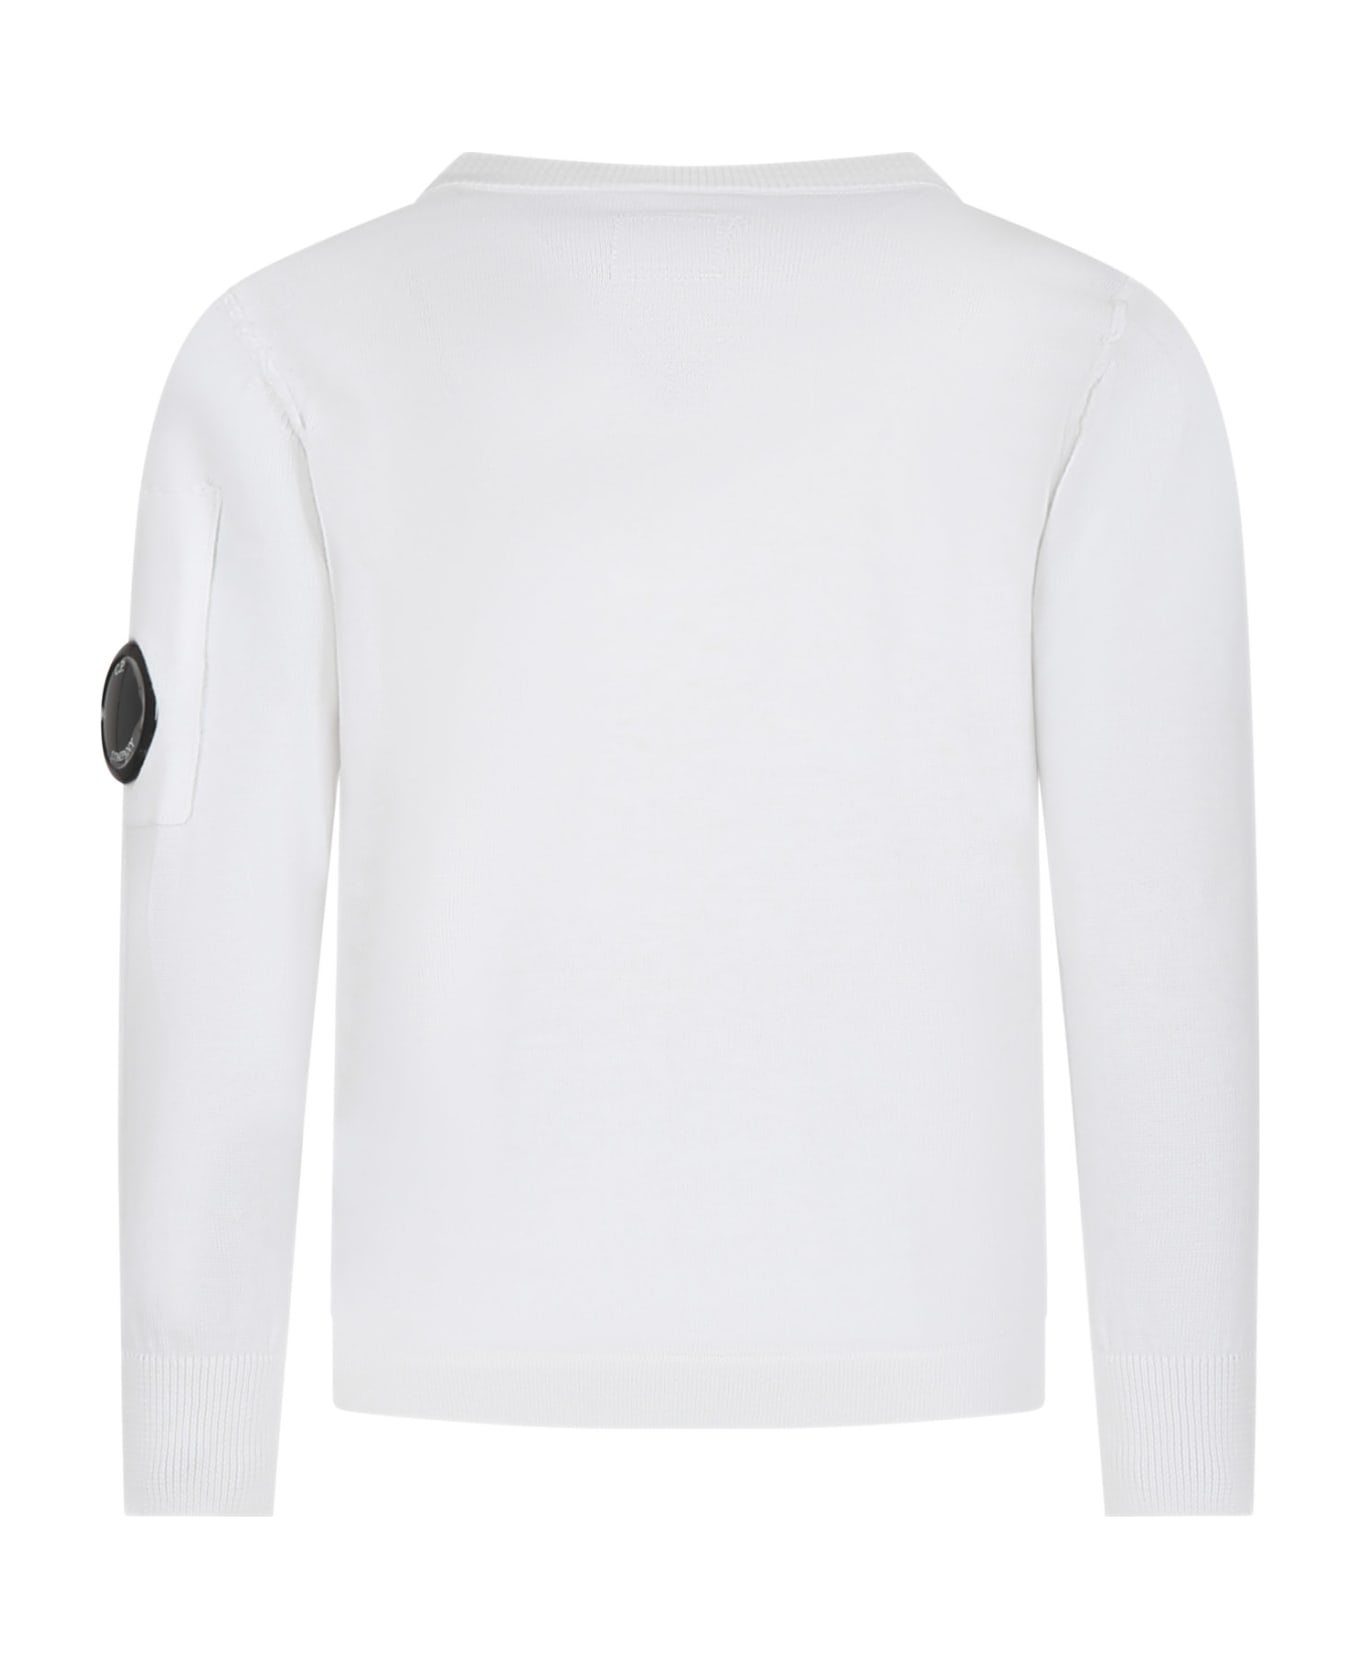 C.P. Company Undersixteen White Sweater For Boy With C.p. Company Lens - White